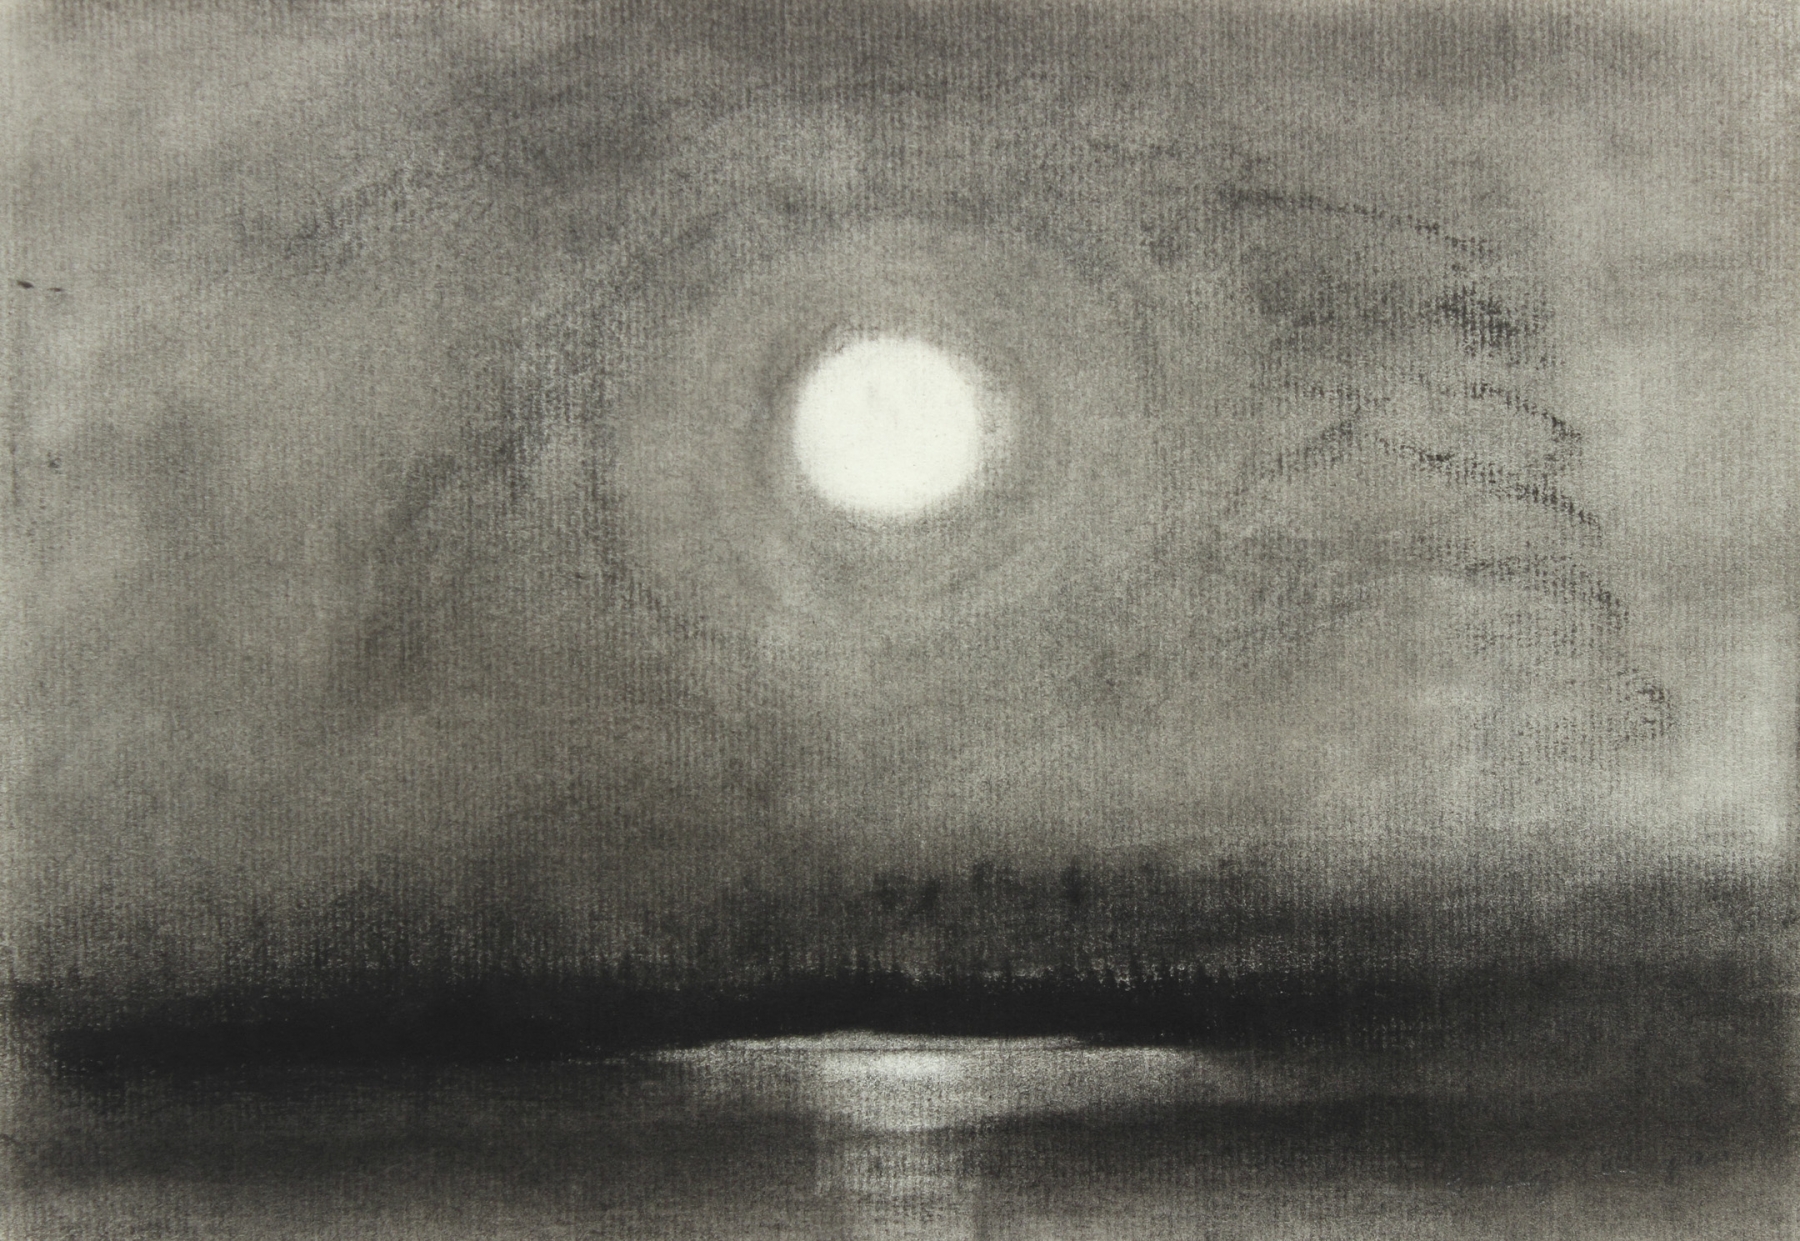 Winter Spring 2002 (1), 2002, charcoal on paper, 7 1/4 x 10 1/4 inches